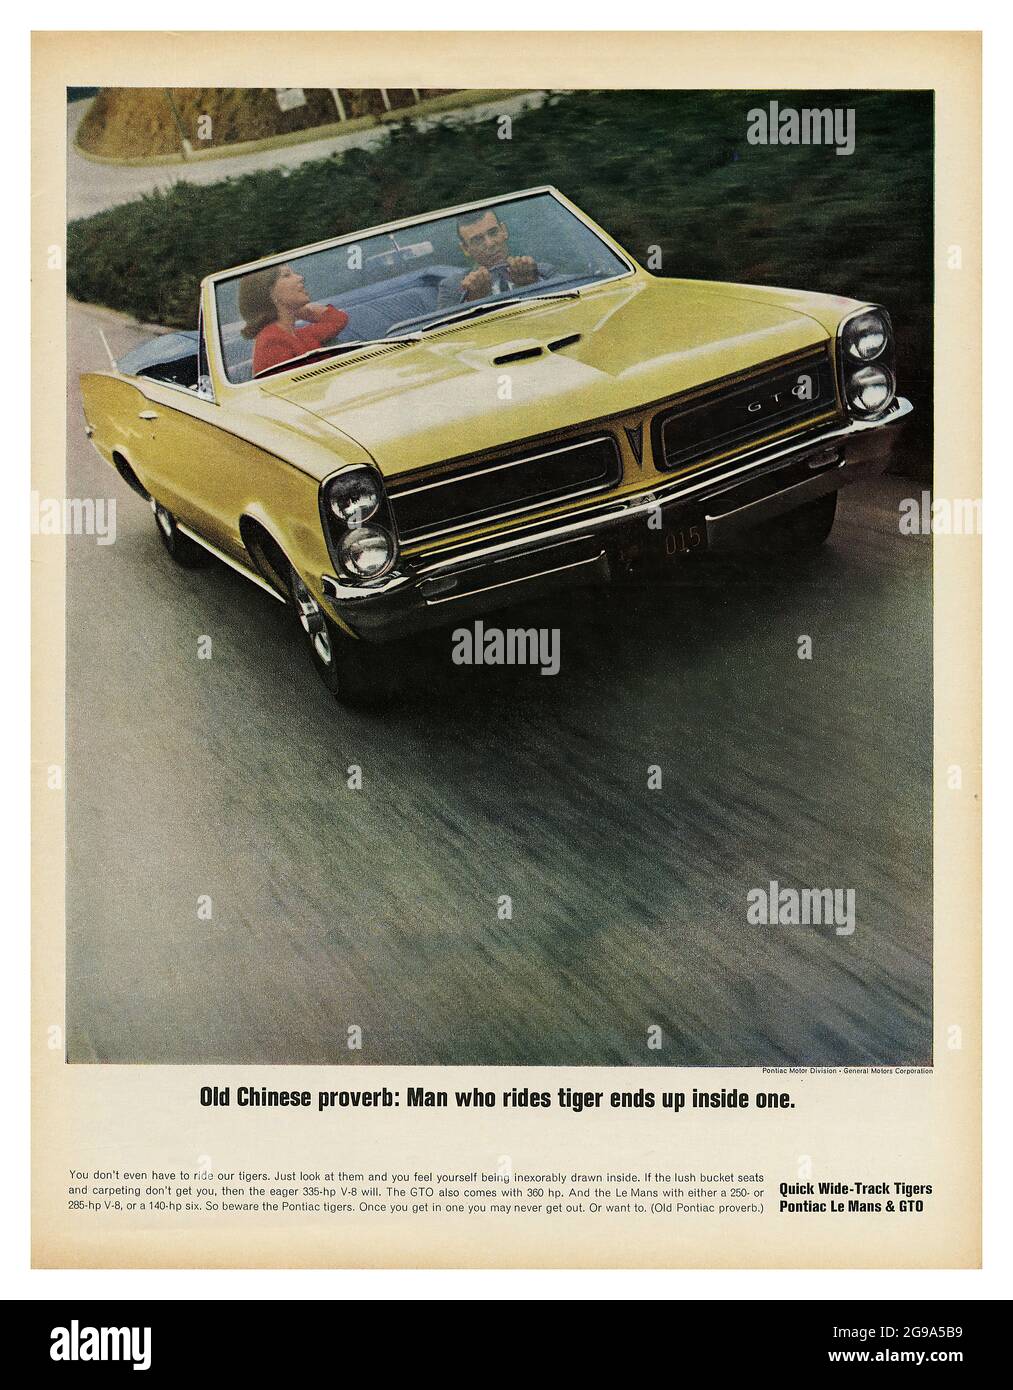 Pontiac Le Mans GTO (1965) - Vintage advertising of classic American car Stock Photo